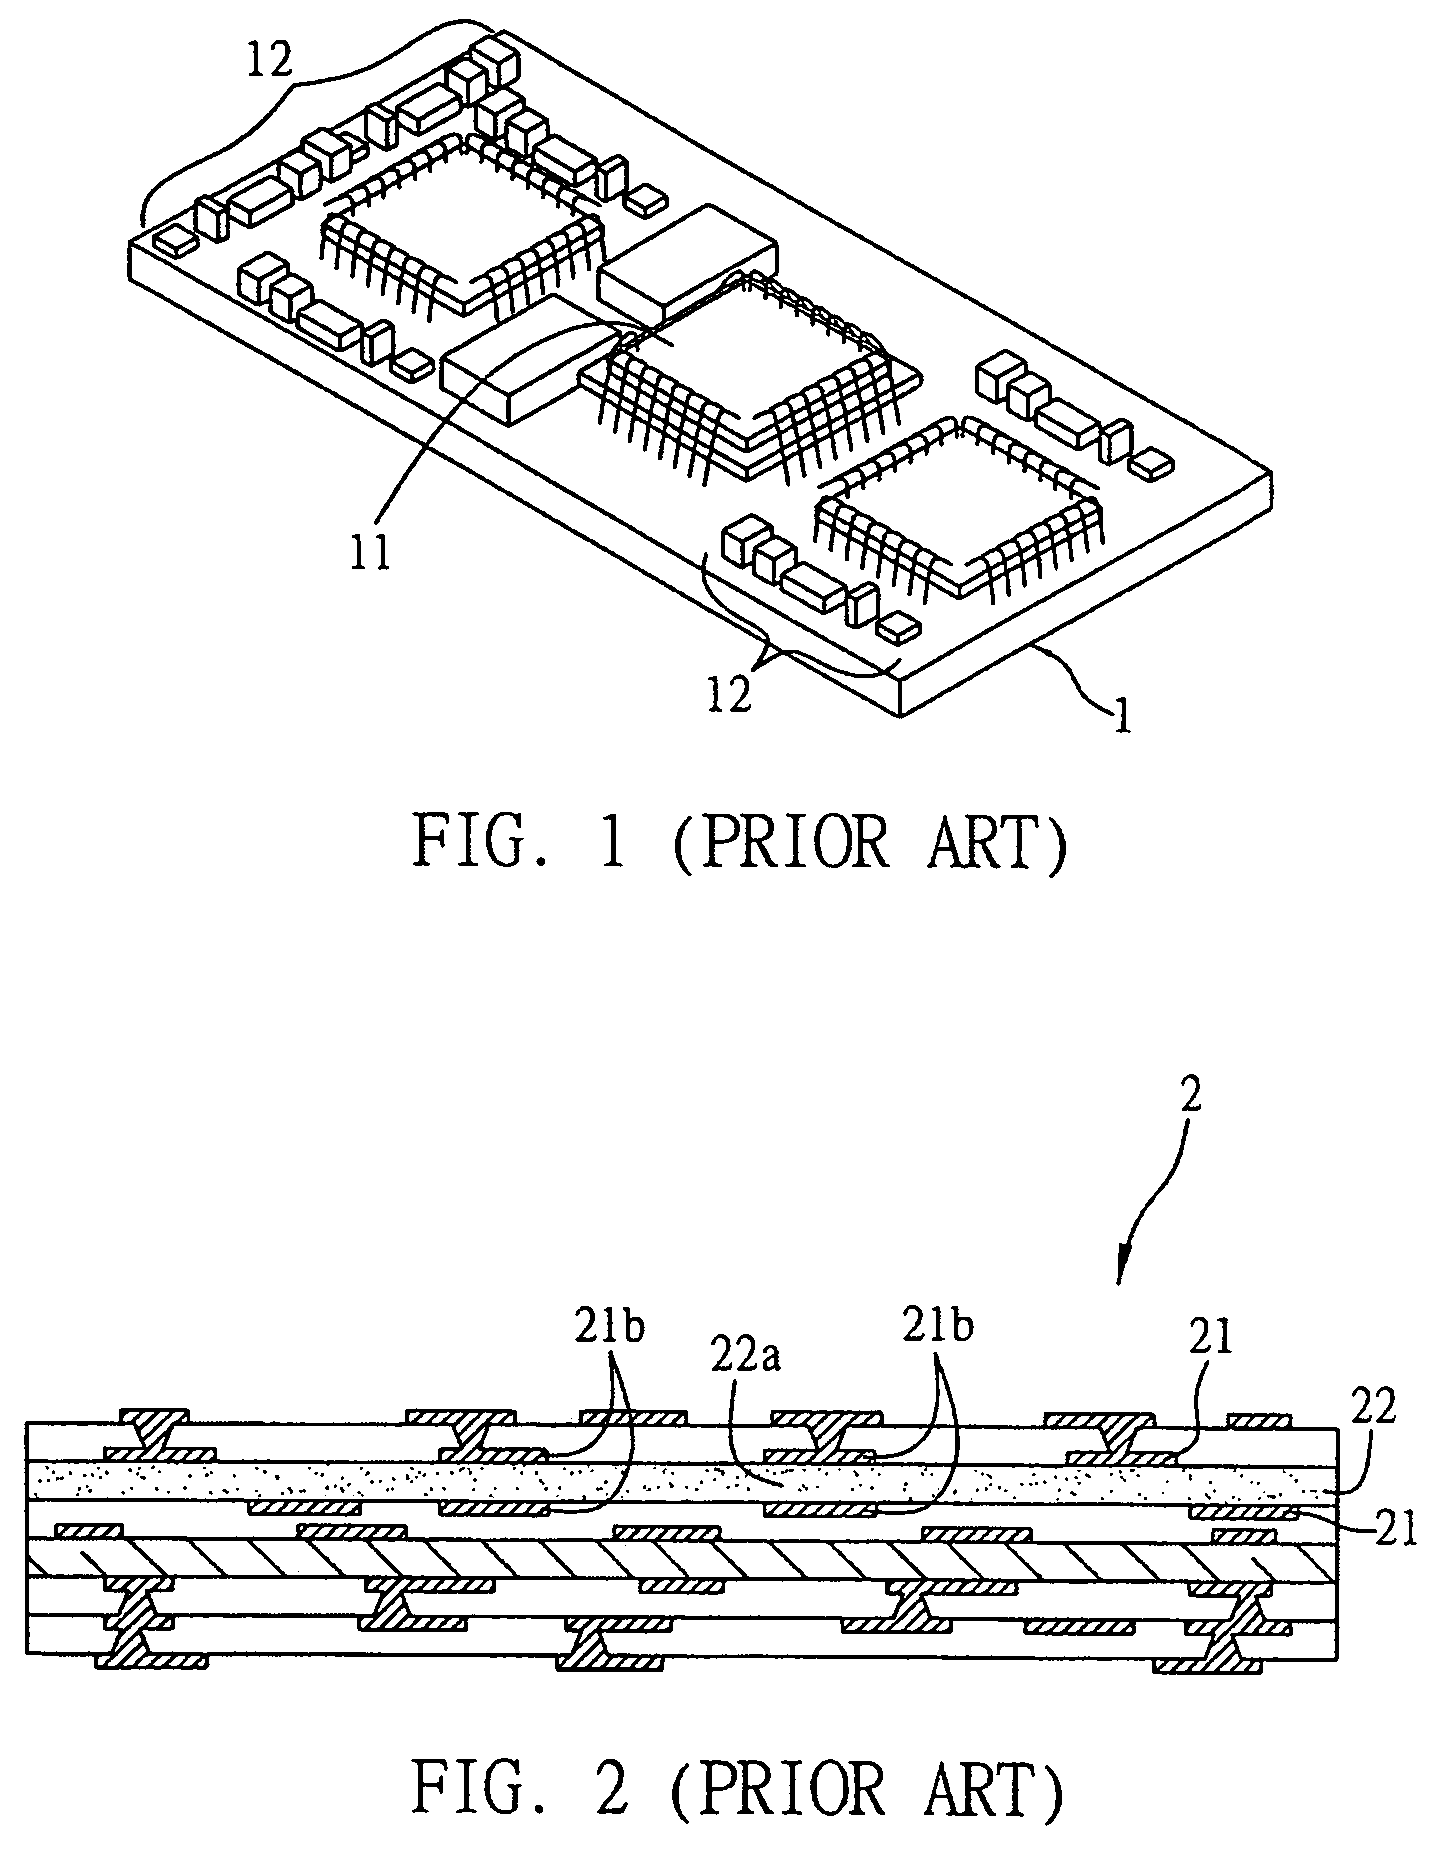 Circuit board structure with embedded selectable passive components and method for fabricating the same